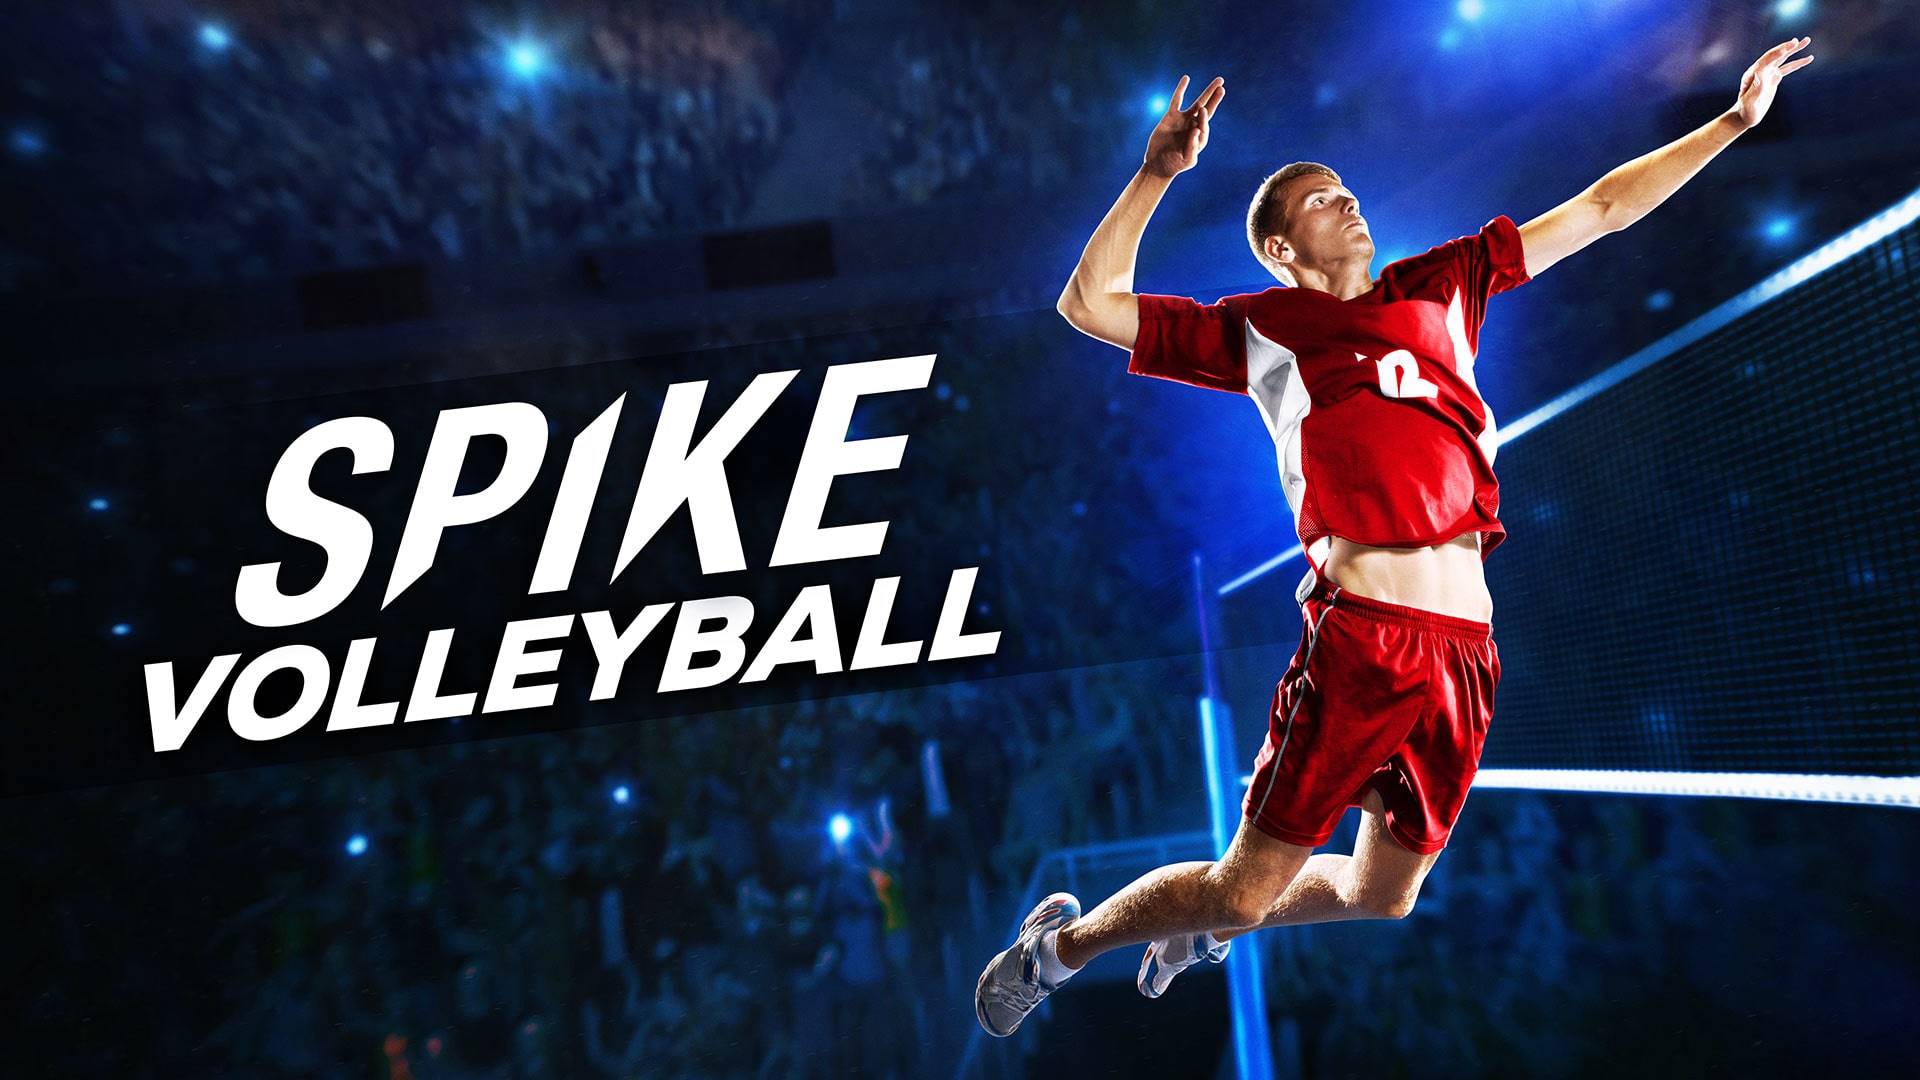 Spike Volley (Simplified Chinese, English, Korean, Traditional Chinese)